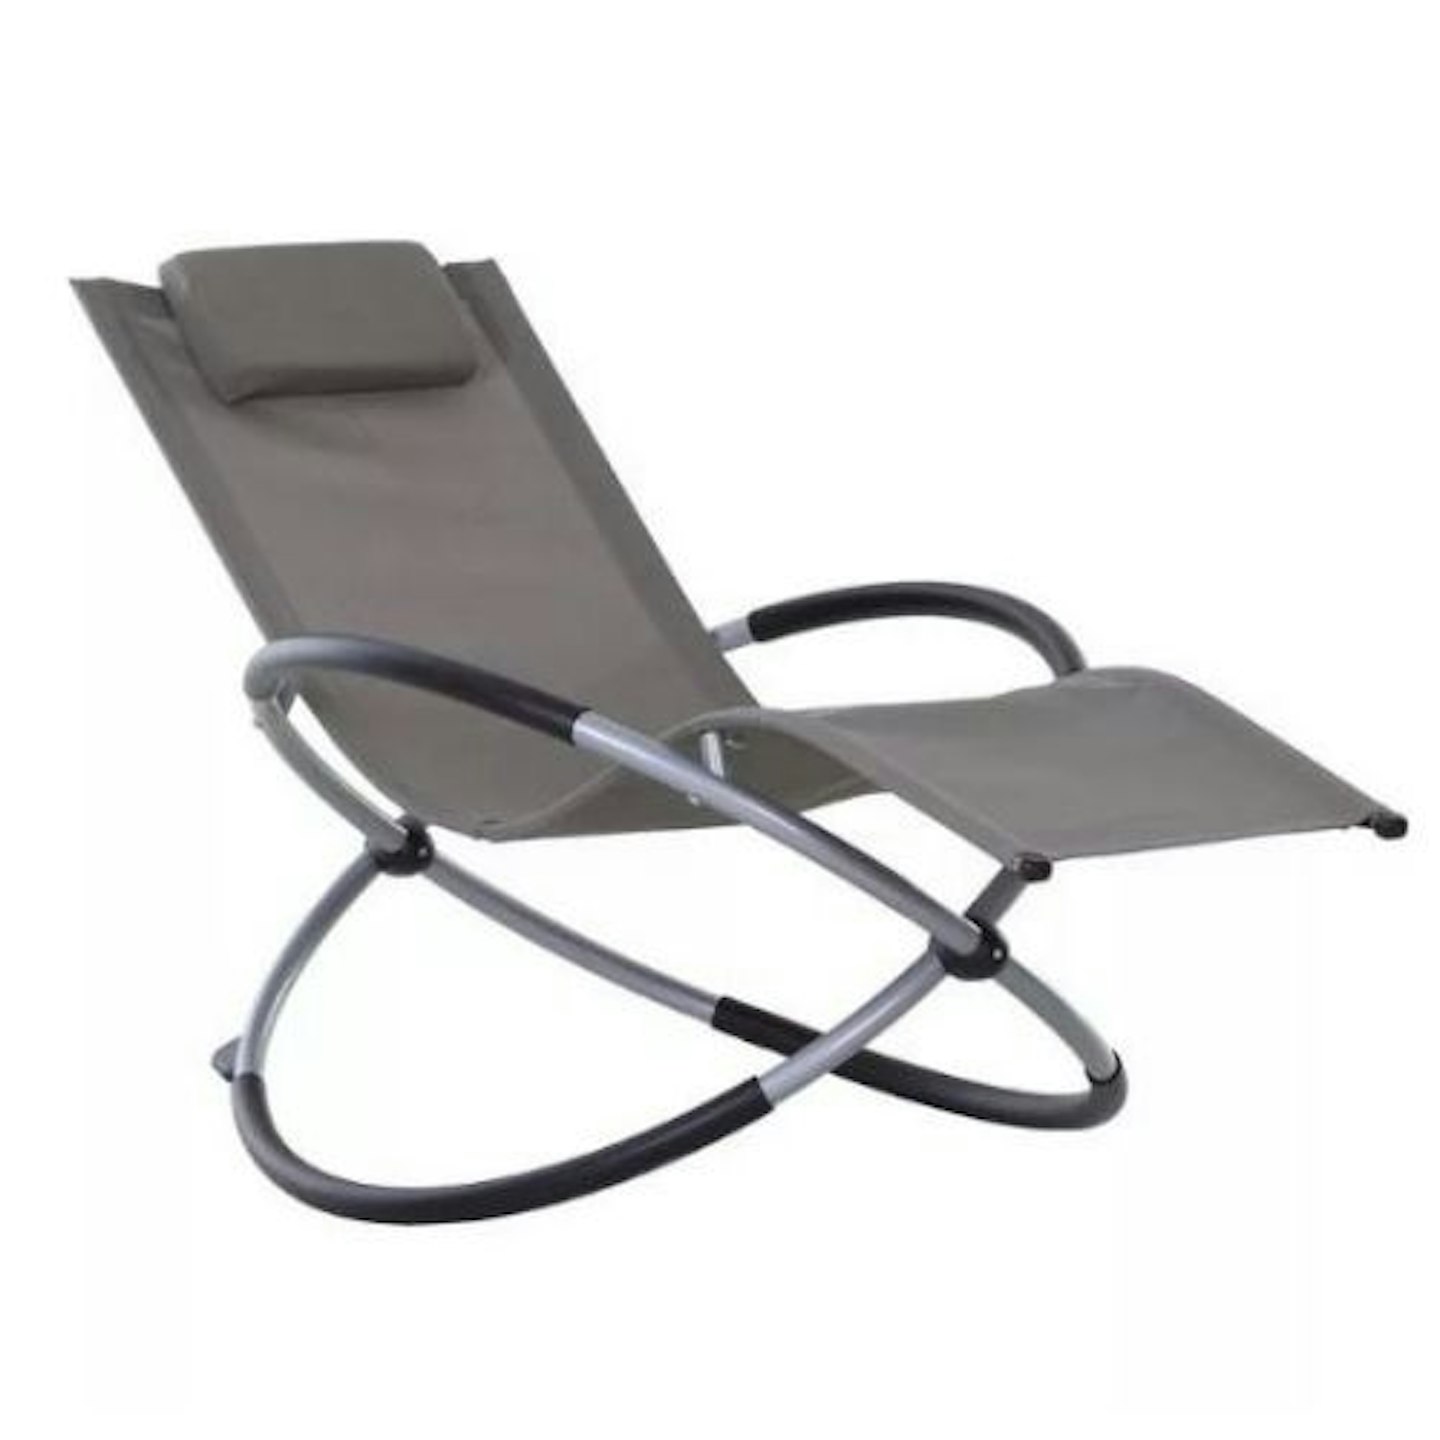 Outsunny Orbital Lounger Zero Gravity Chaise with Pillow